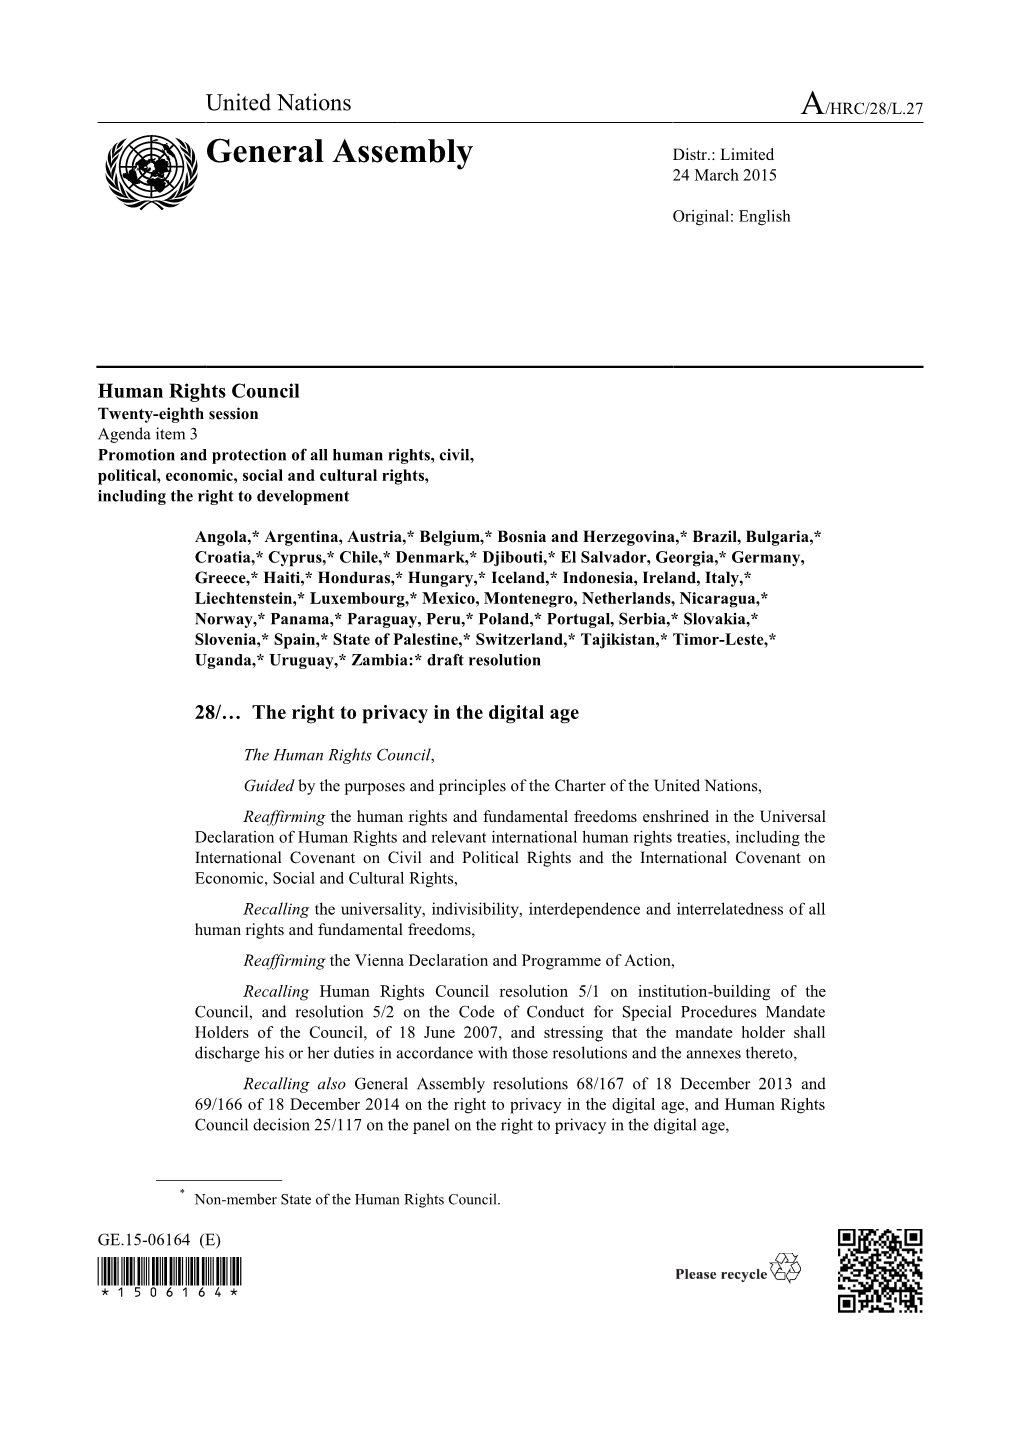 Human Rights Council, Draft Resolution 28/… the Right to Privacy